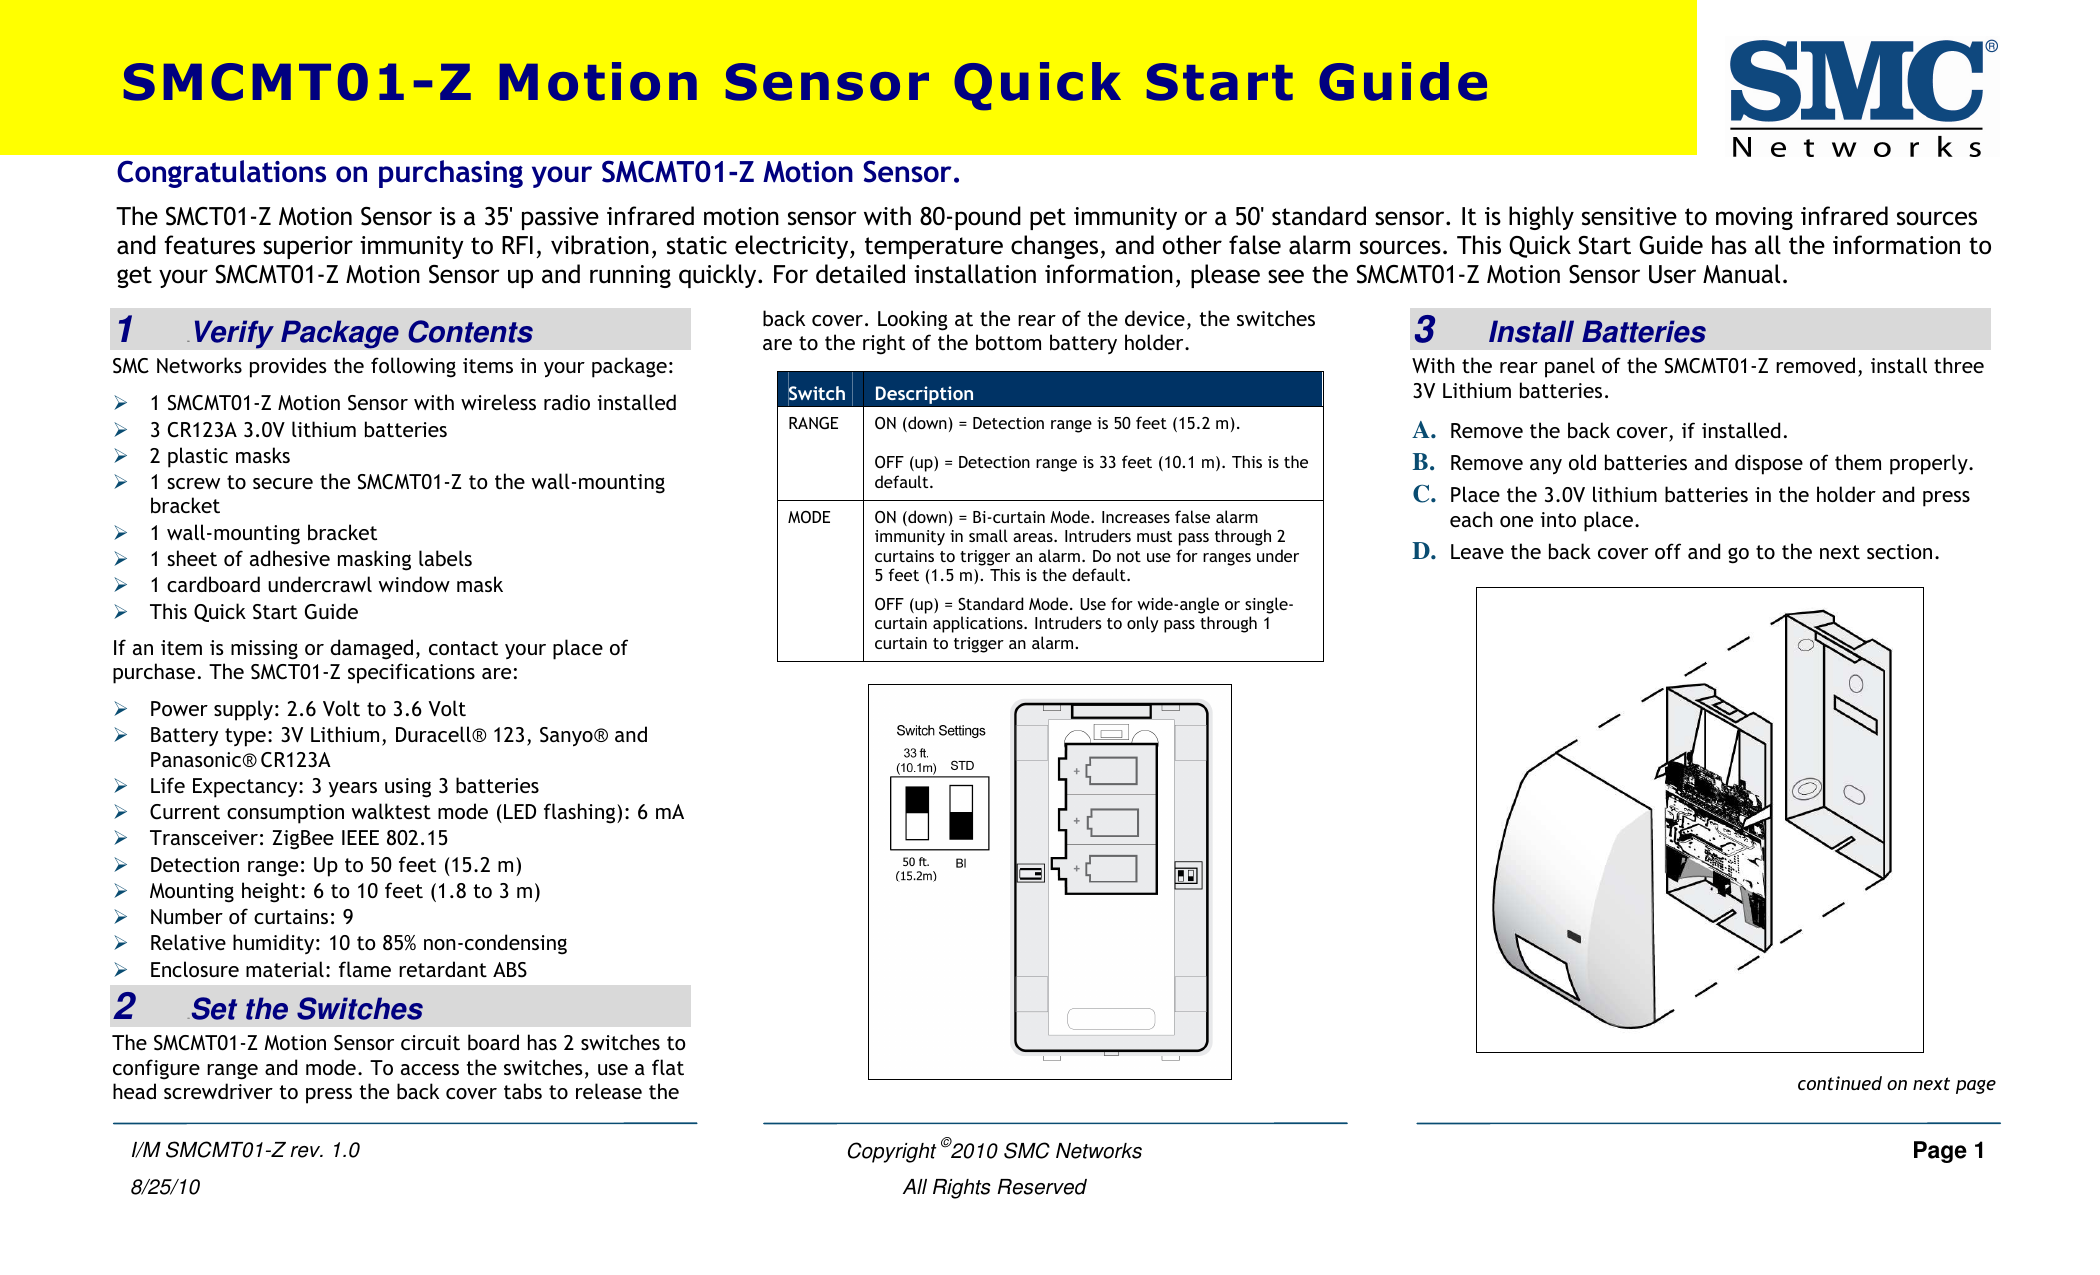    Copyright ©2010 SMC Networks     Page 1  All Rights Reserved I/M SMCMT01-Z rev. 1.0 8/25/10  1   0BVerify Package Contents SMC Networks provides the following items in your package:  1 SMCMT01-Z Motion Sensor with wireless radio installed  3 CR123A 3.0V lithium batteries  2 plastic masks  1 screw to secure the SMCMT01-Z to the wall-mounting bracket  1 wall-mounting bracket  1 sheet of adhesive masking labels  1 cardboard undercrawl window mask  This Quick Start Guide If an item is missing or damaged, contact your place of purchase. The SMCT01-Z specifications are:  Power supply: 2.6 Volt to 3.6 Volt  Battery type: 3V Lithium, Duracell® 123, Sanyo® and Panasonic® CR123A   Life Expectancy: 3 years using 3 batteries  Current consumption walktest mode (LED flashing): 6 mA  Transceiver: ZigBee IEEE 802.15  Detection range: Up to 50 feet (15.2 m)  Mounting height: 6 to 10 feet (1.8 to 3 m)  Number of curtains: 9  Relative humidity: 10 to 85% non-condensing  Enclosure material: flame retardant ABS 2   1BSet the Switches The SMCMT01-Z Motion Sensor circuit board has 2 switches to configure range and mode. To access the switches, use a flat head screwdriver to press the back cover tabs to release the back cover. Looking at the rear of the device, the switches are to the right of the bottom battery holder.    3   Install Batteries With the rear panel of the SMCMT01-Z removed, install three 3V Lithium batteries. A. Remove the back cover, if installed. B. Remove any old batteries and dispose of them properly. C. Place the 3.0V lithium batteries in the holder and press each one into place. D. Leave the back cover off and go to the next section.     Switch  Description ON (down) = Detection range is 50 feet (15.2 m). RANGE OFF (up) = Detection range is 33 feet (10.1 m). This is the default. ON (down) = Bi-curtain Mode. Increases false alarm immunity in small areas. Intruders must pass through 2 curtains to trigger an alarm. Do not use for ranges under 5 feet (1.5 m). This is the default. MODE OFF (up) = Standard Mode. Use for wide-angle or single-curtain applications. Intruders to only pass through 1 curtain to trigger an alarm. Congratulations on purchasing your SMCMT01-Z Motion Sensor. The SMCT01-Z Motion Sensor is a 35&apos; passive infrared motion sensor with 80-pound pet immunity or a 50&apos; standard sensor. It is highly sensitive to moving infrared sources and features superior immunity to RFI, vibration, static electricity, temperature changes, and other false alarm sources. This Quick Start Guide has all the information to get your SMCMT01-Z Motion Sensor up and running quickly. For detailed installation information, please see the SMCMT01-Z Motion Sensor User Manual.  SMCMT01-Z Motion Sensor Quick Start Guide continued on next page